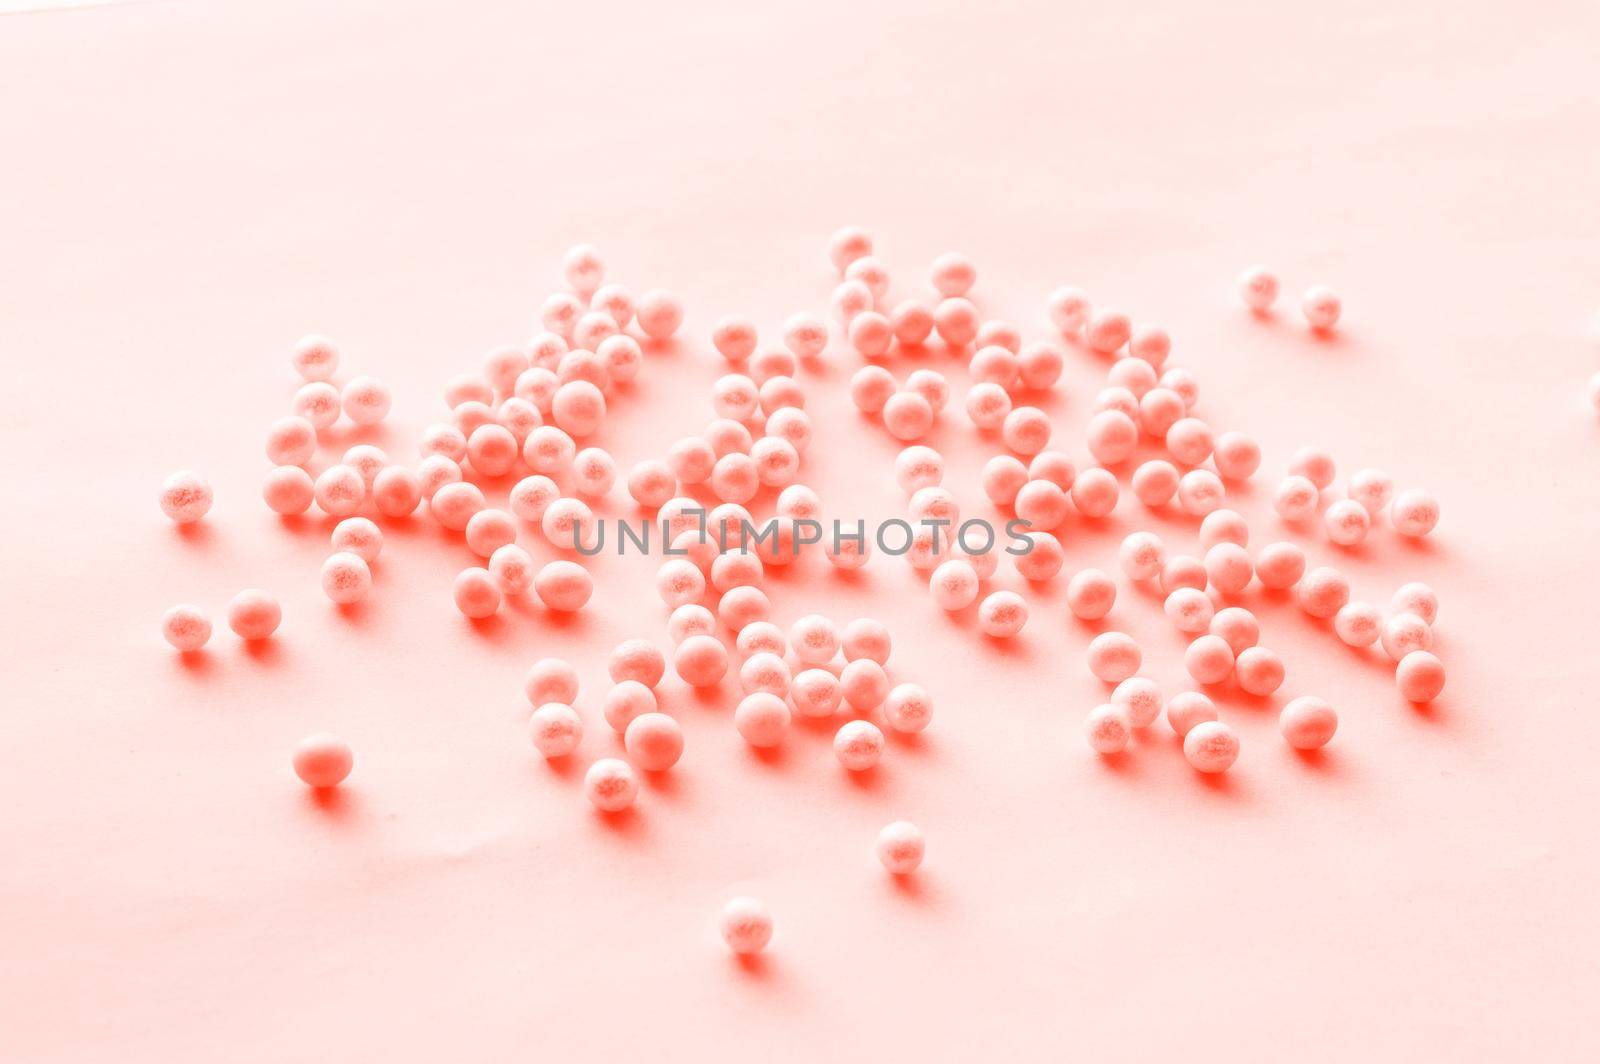 Romantic pattern of pink tinted beads scattered on a soft pink background, festive pattern for wedding design close-up. Hobby, craft and handmade theme.